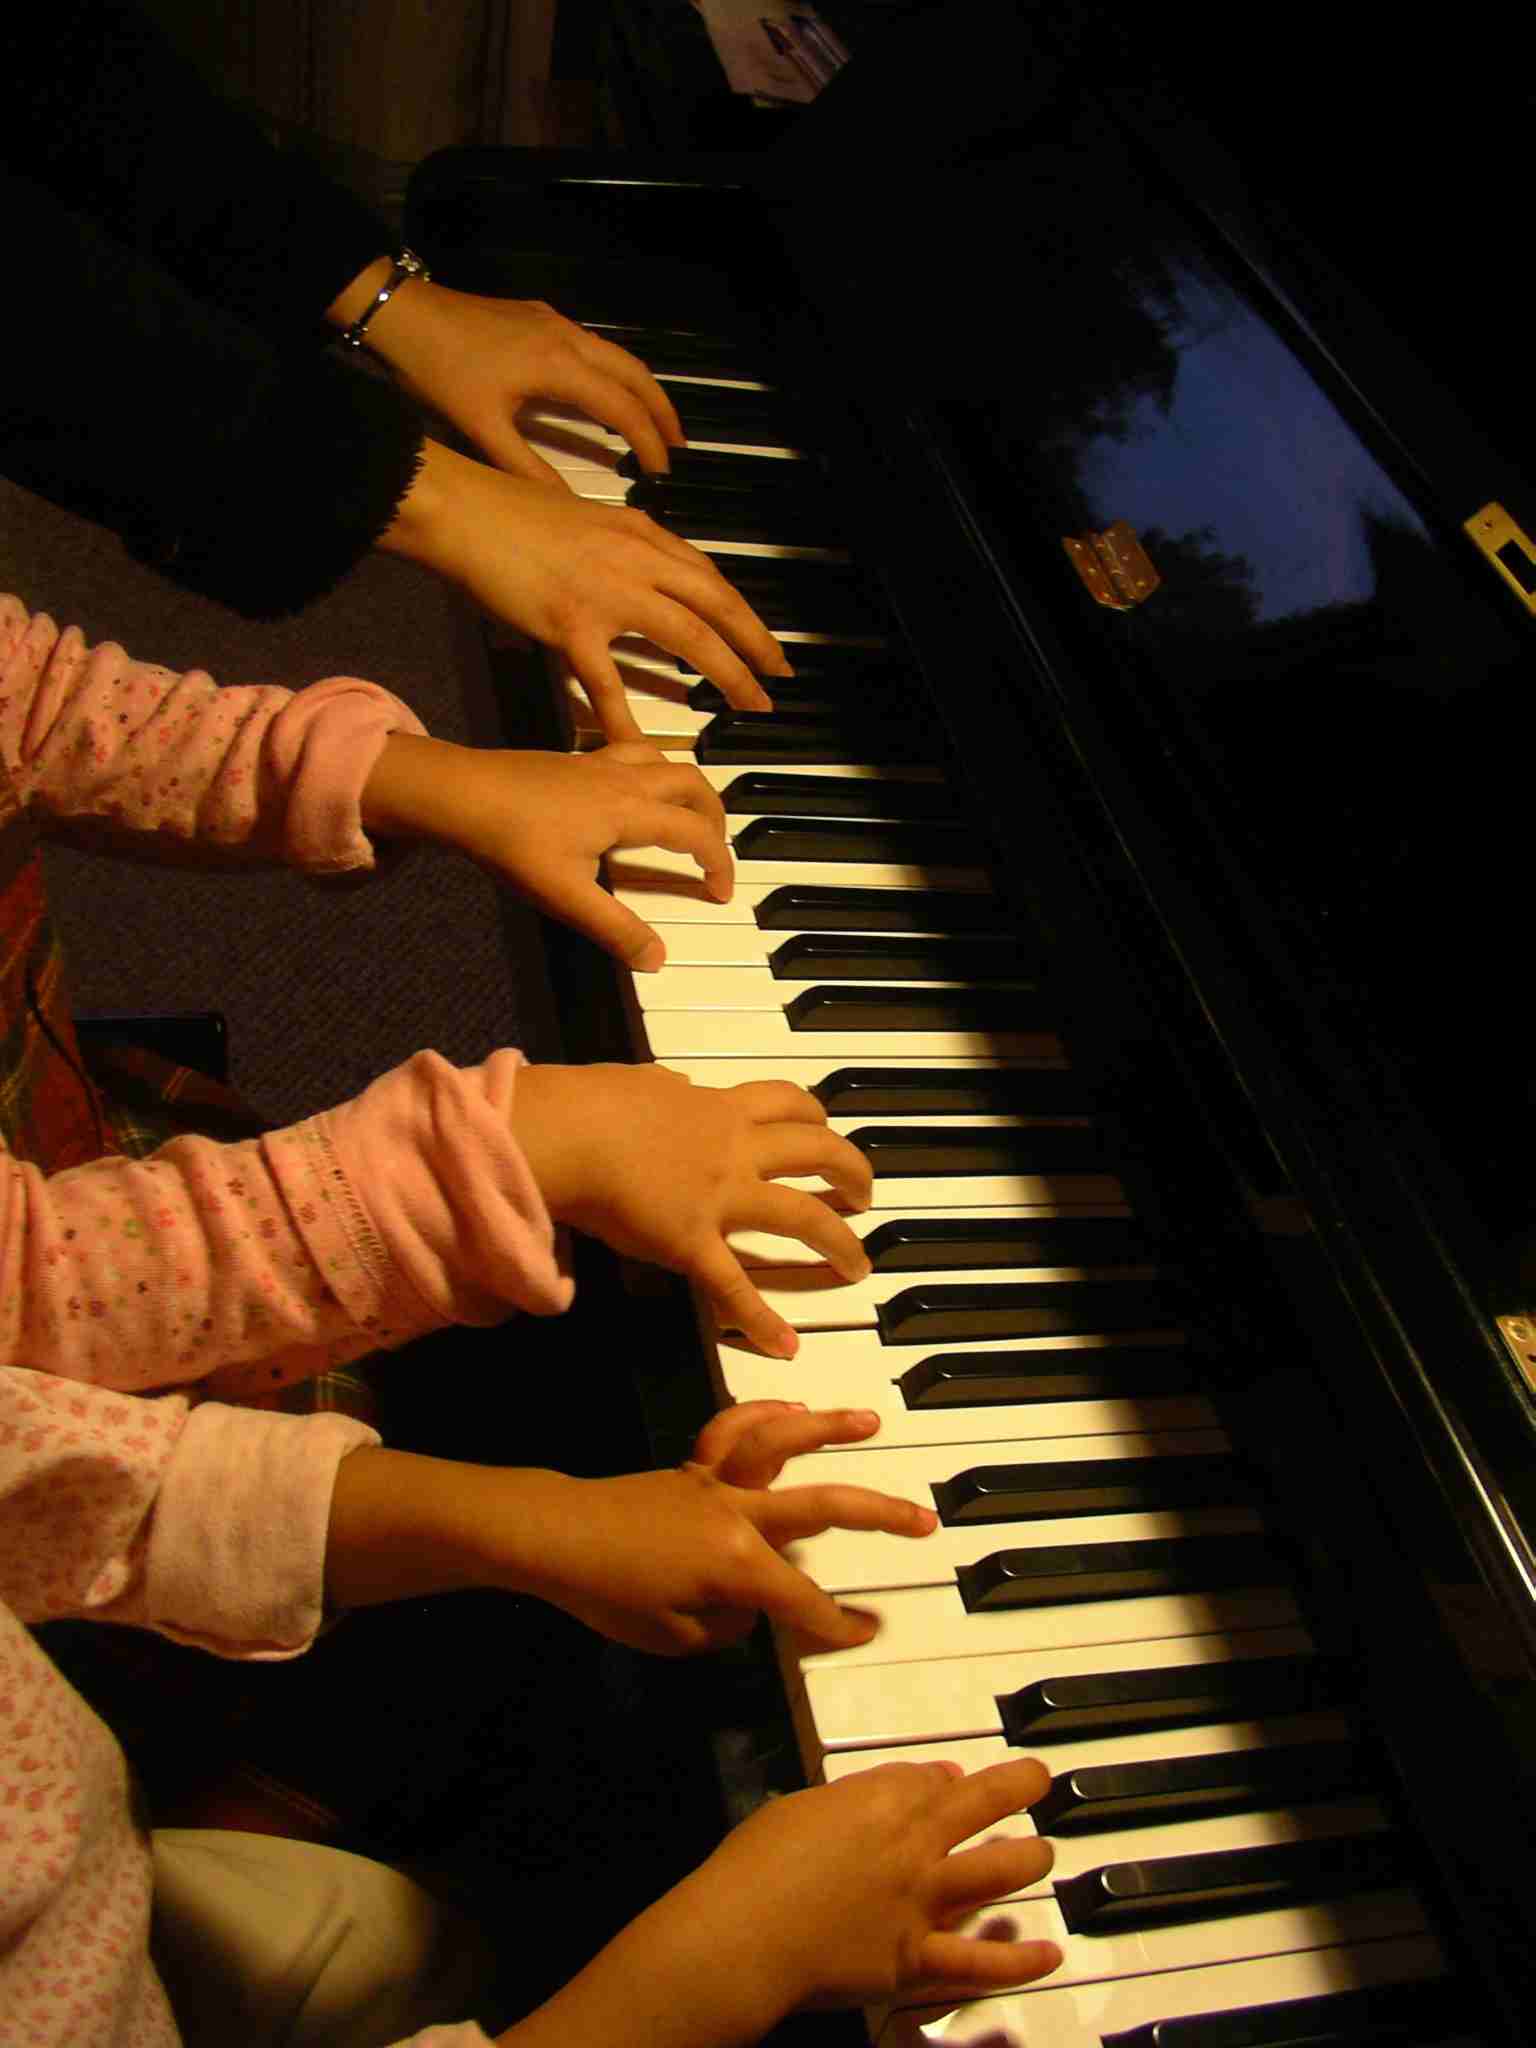 Hands on the piano